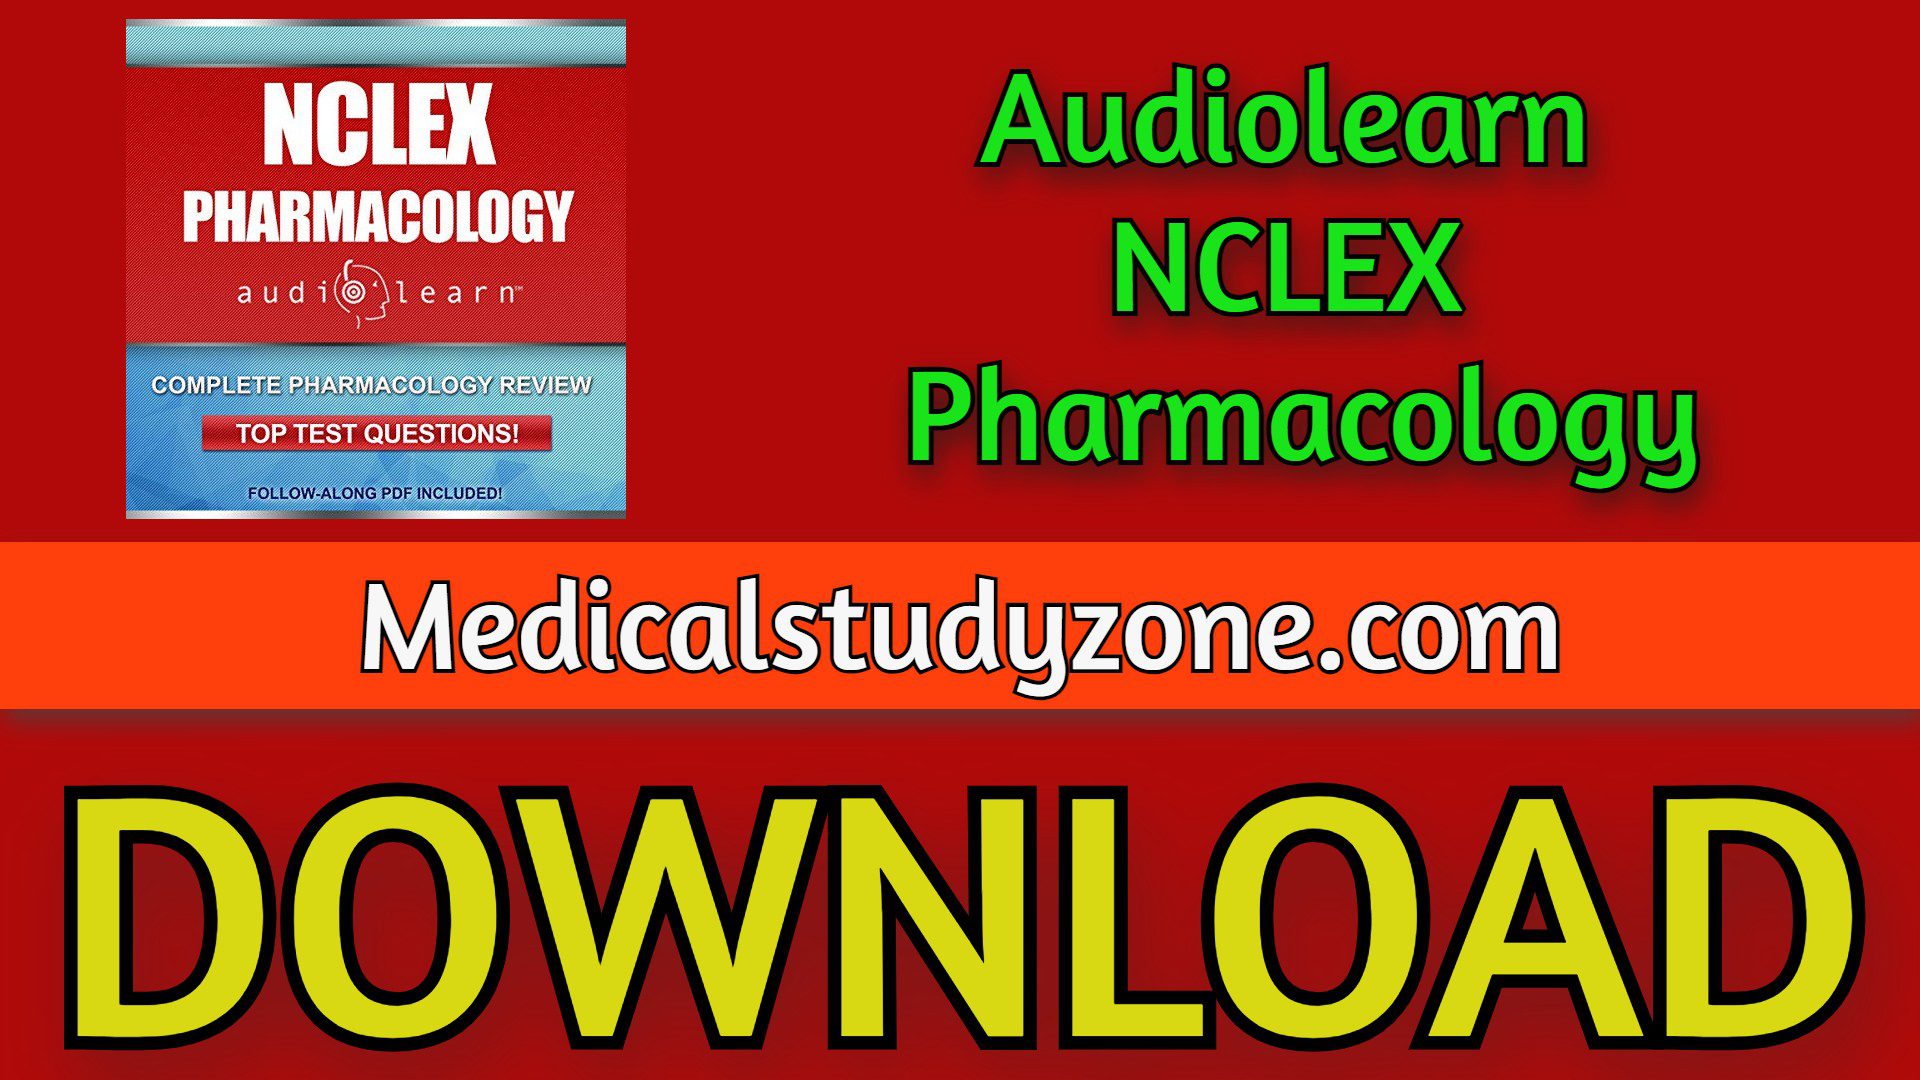 Audiolearn NCLEX Pharmacology 2021 Free Download